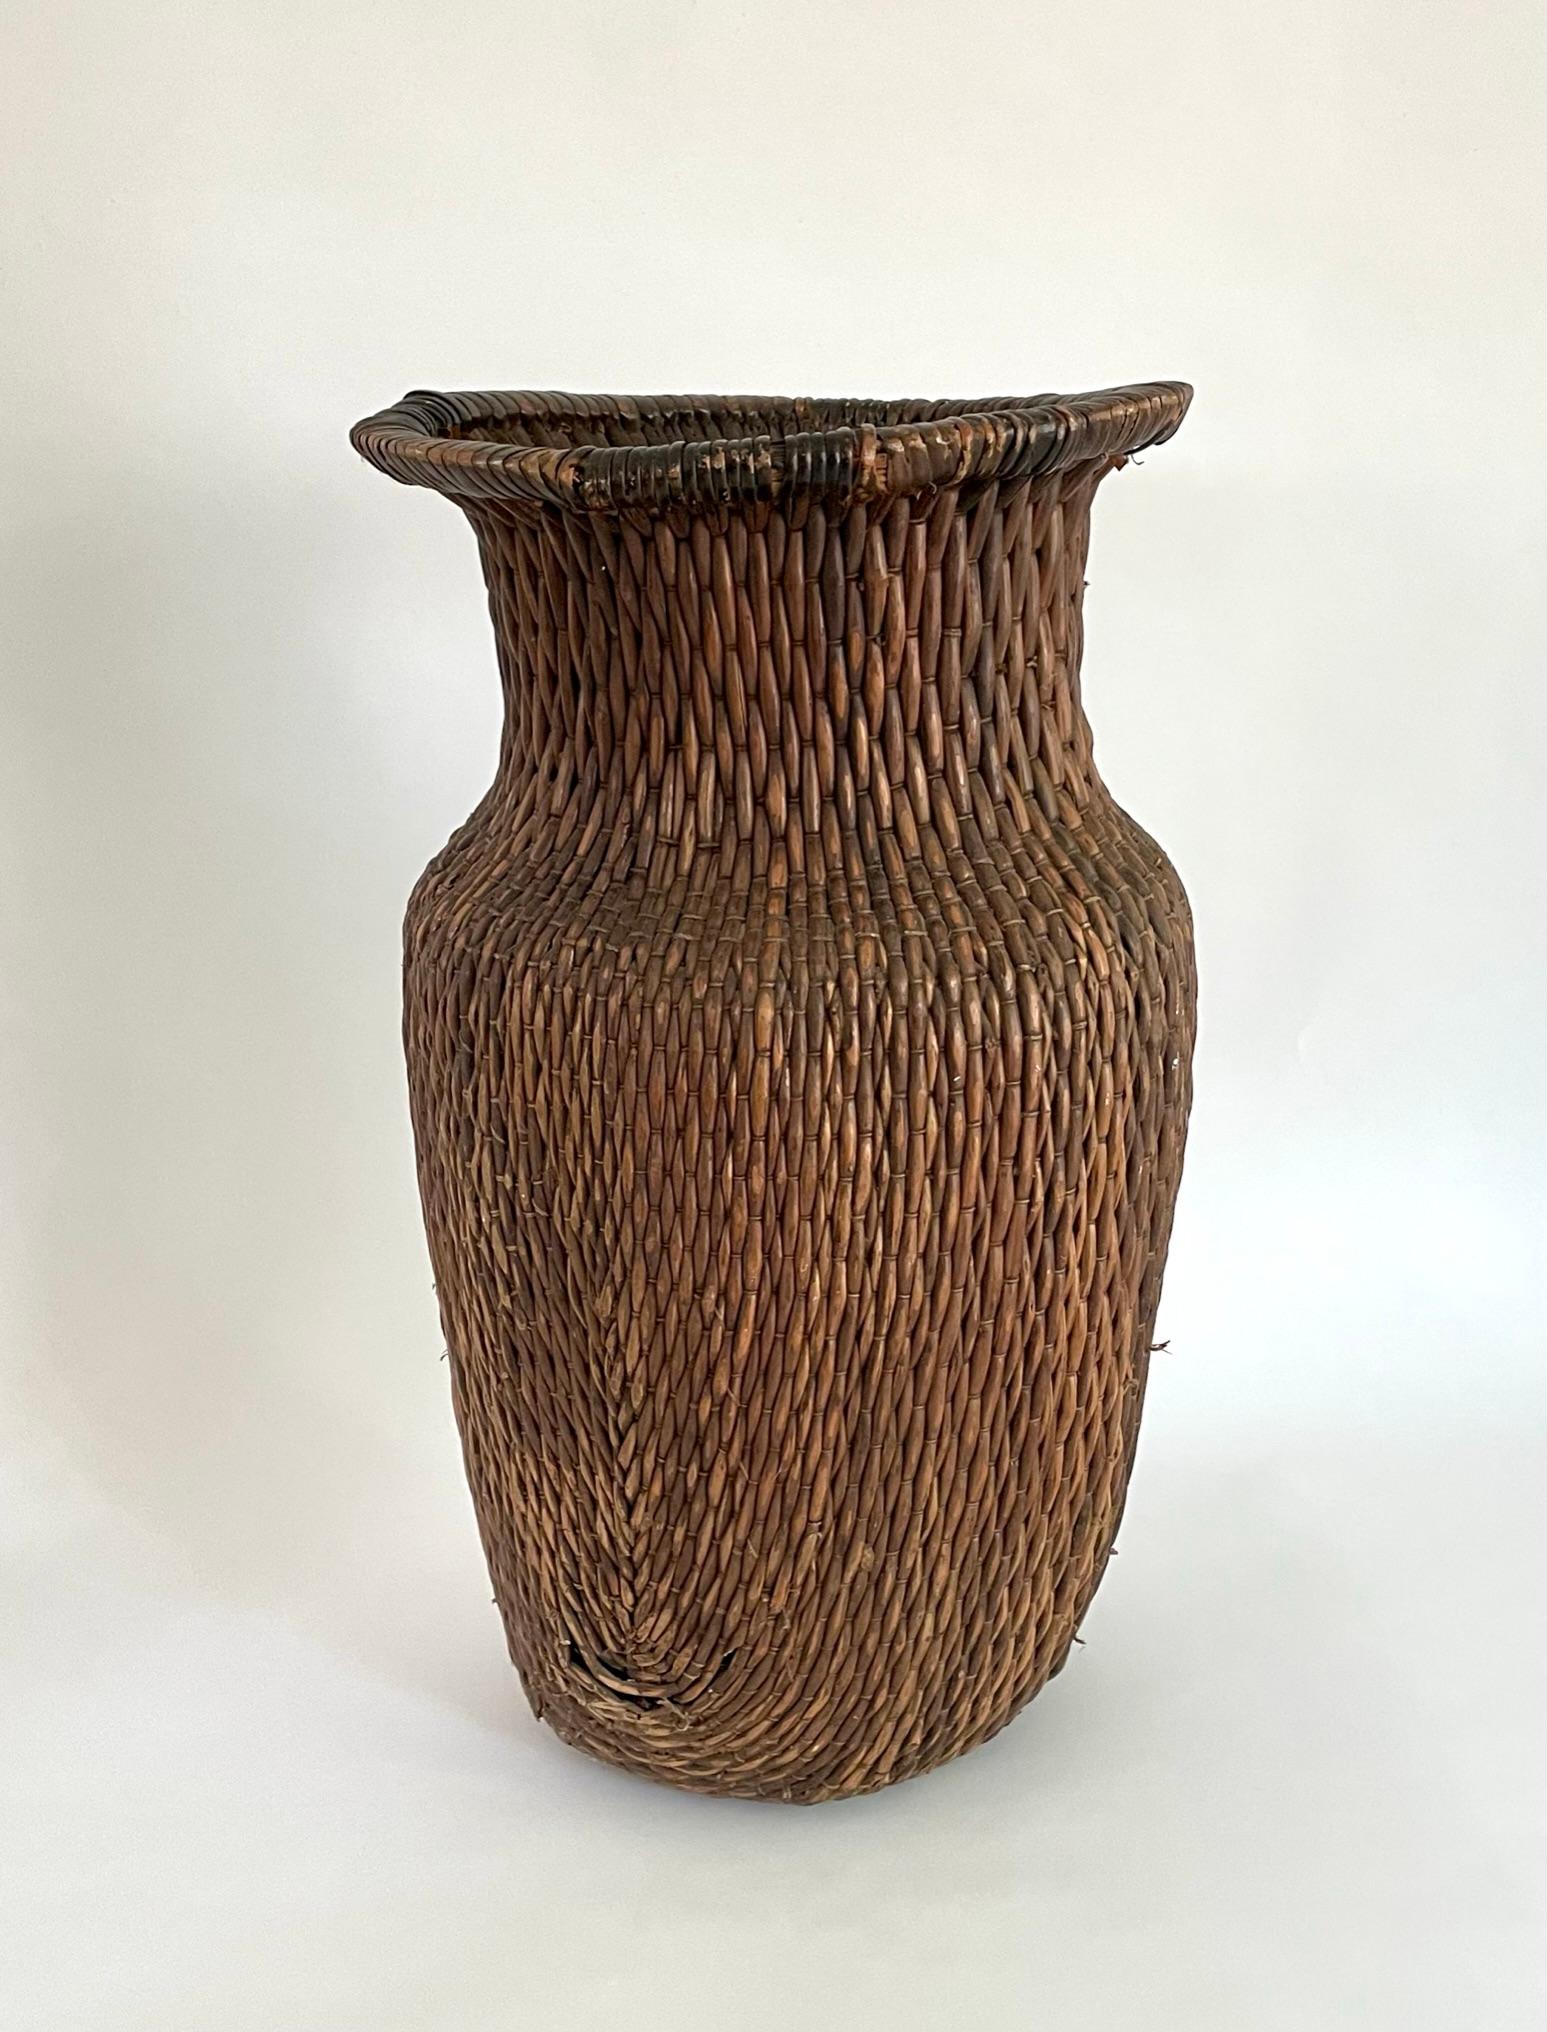 Hand-Woven Large Chinese Willow Basket